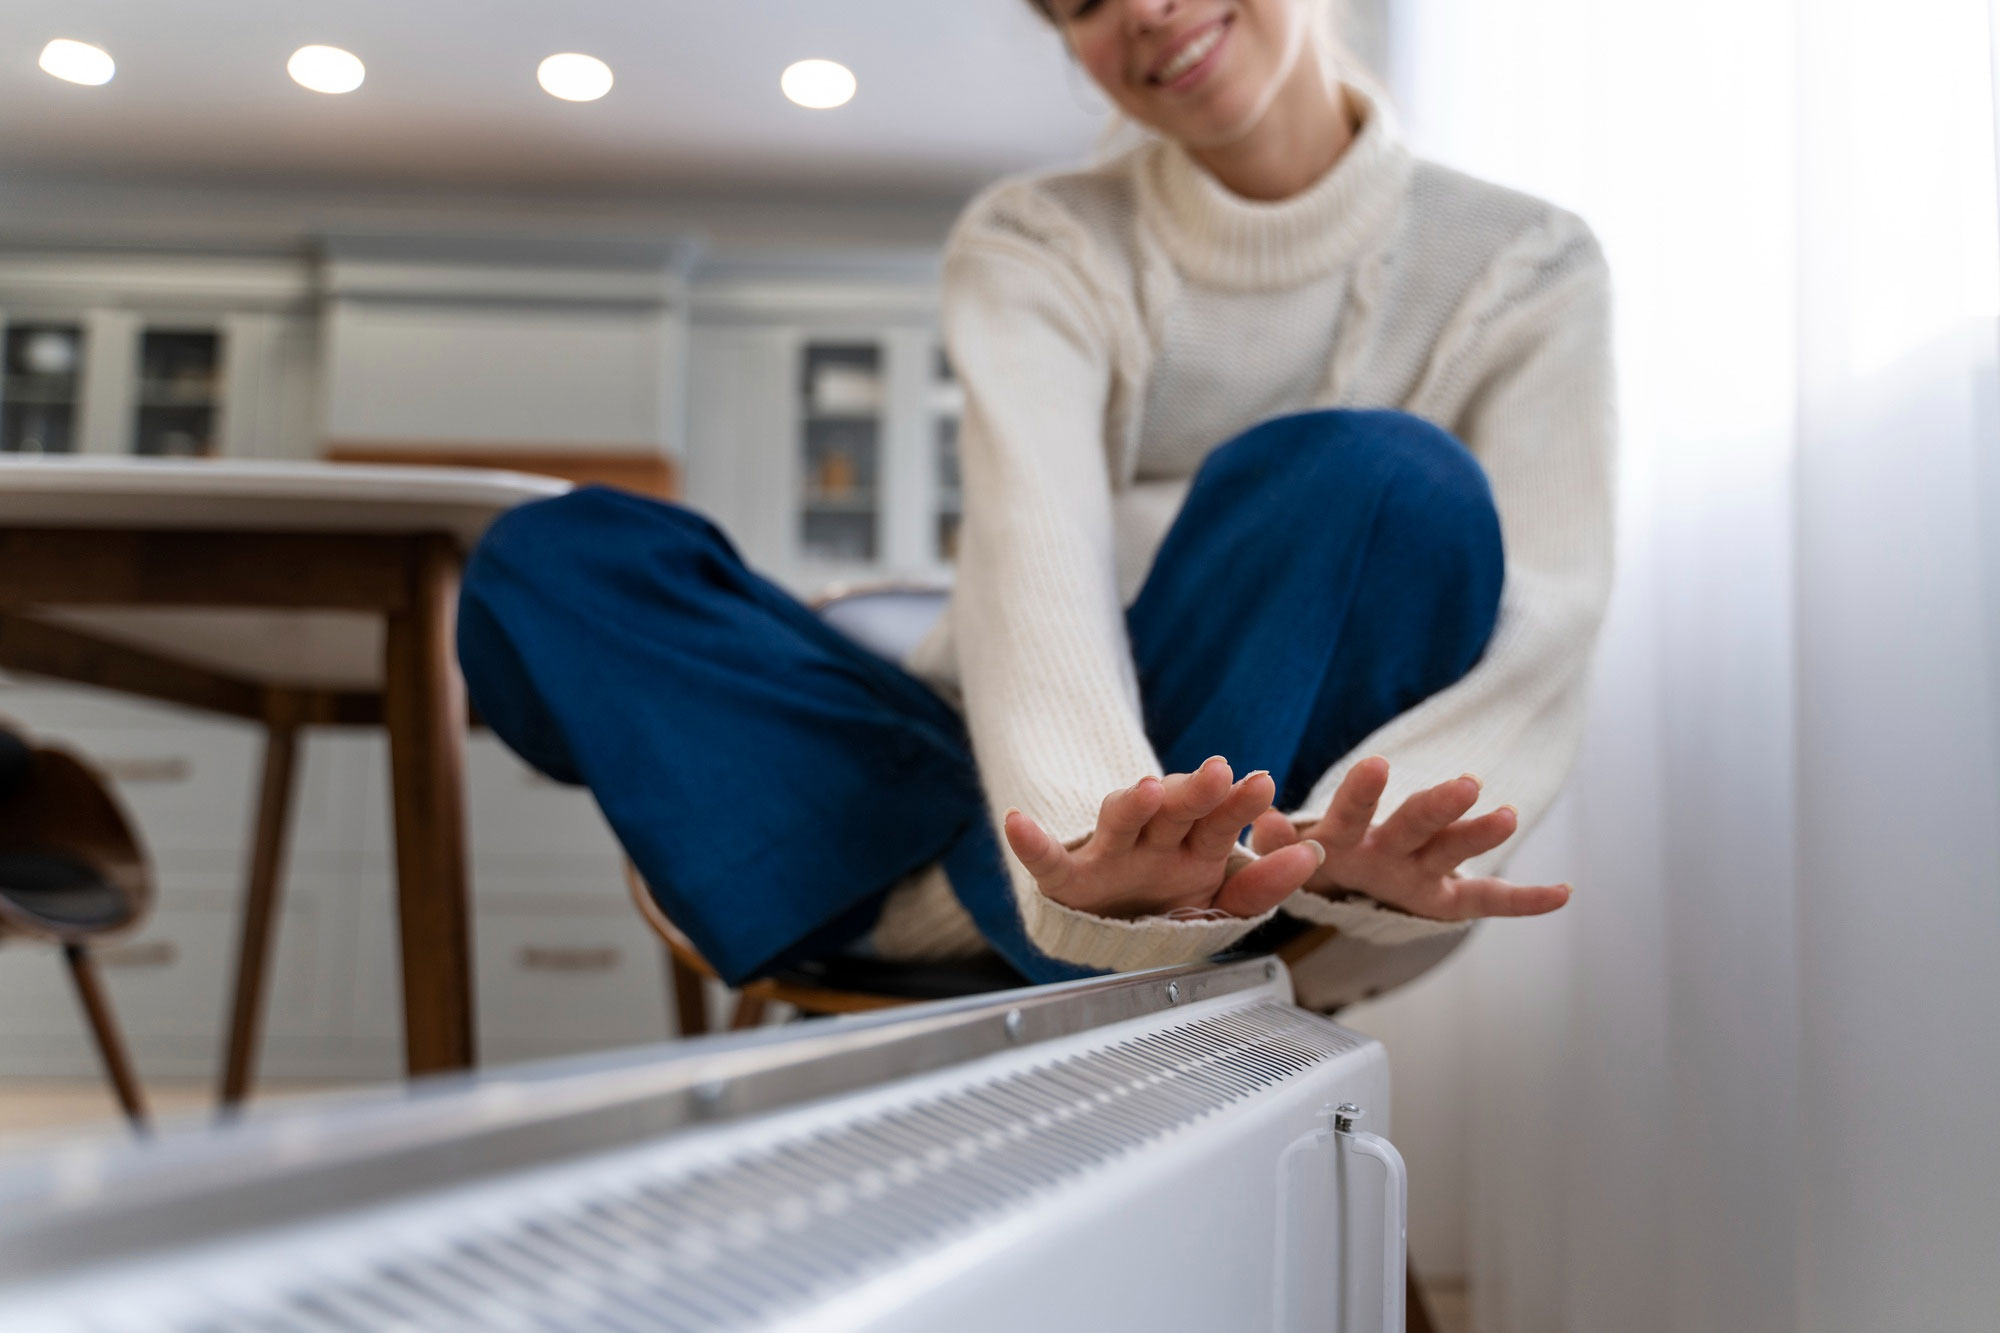 Picture of a Woman Warming Her Hands Near a Heater